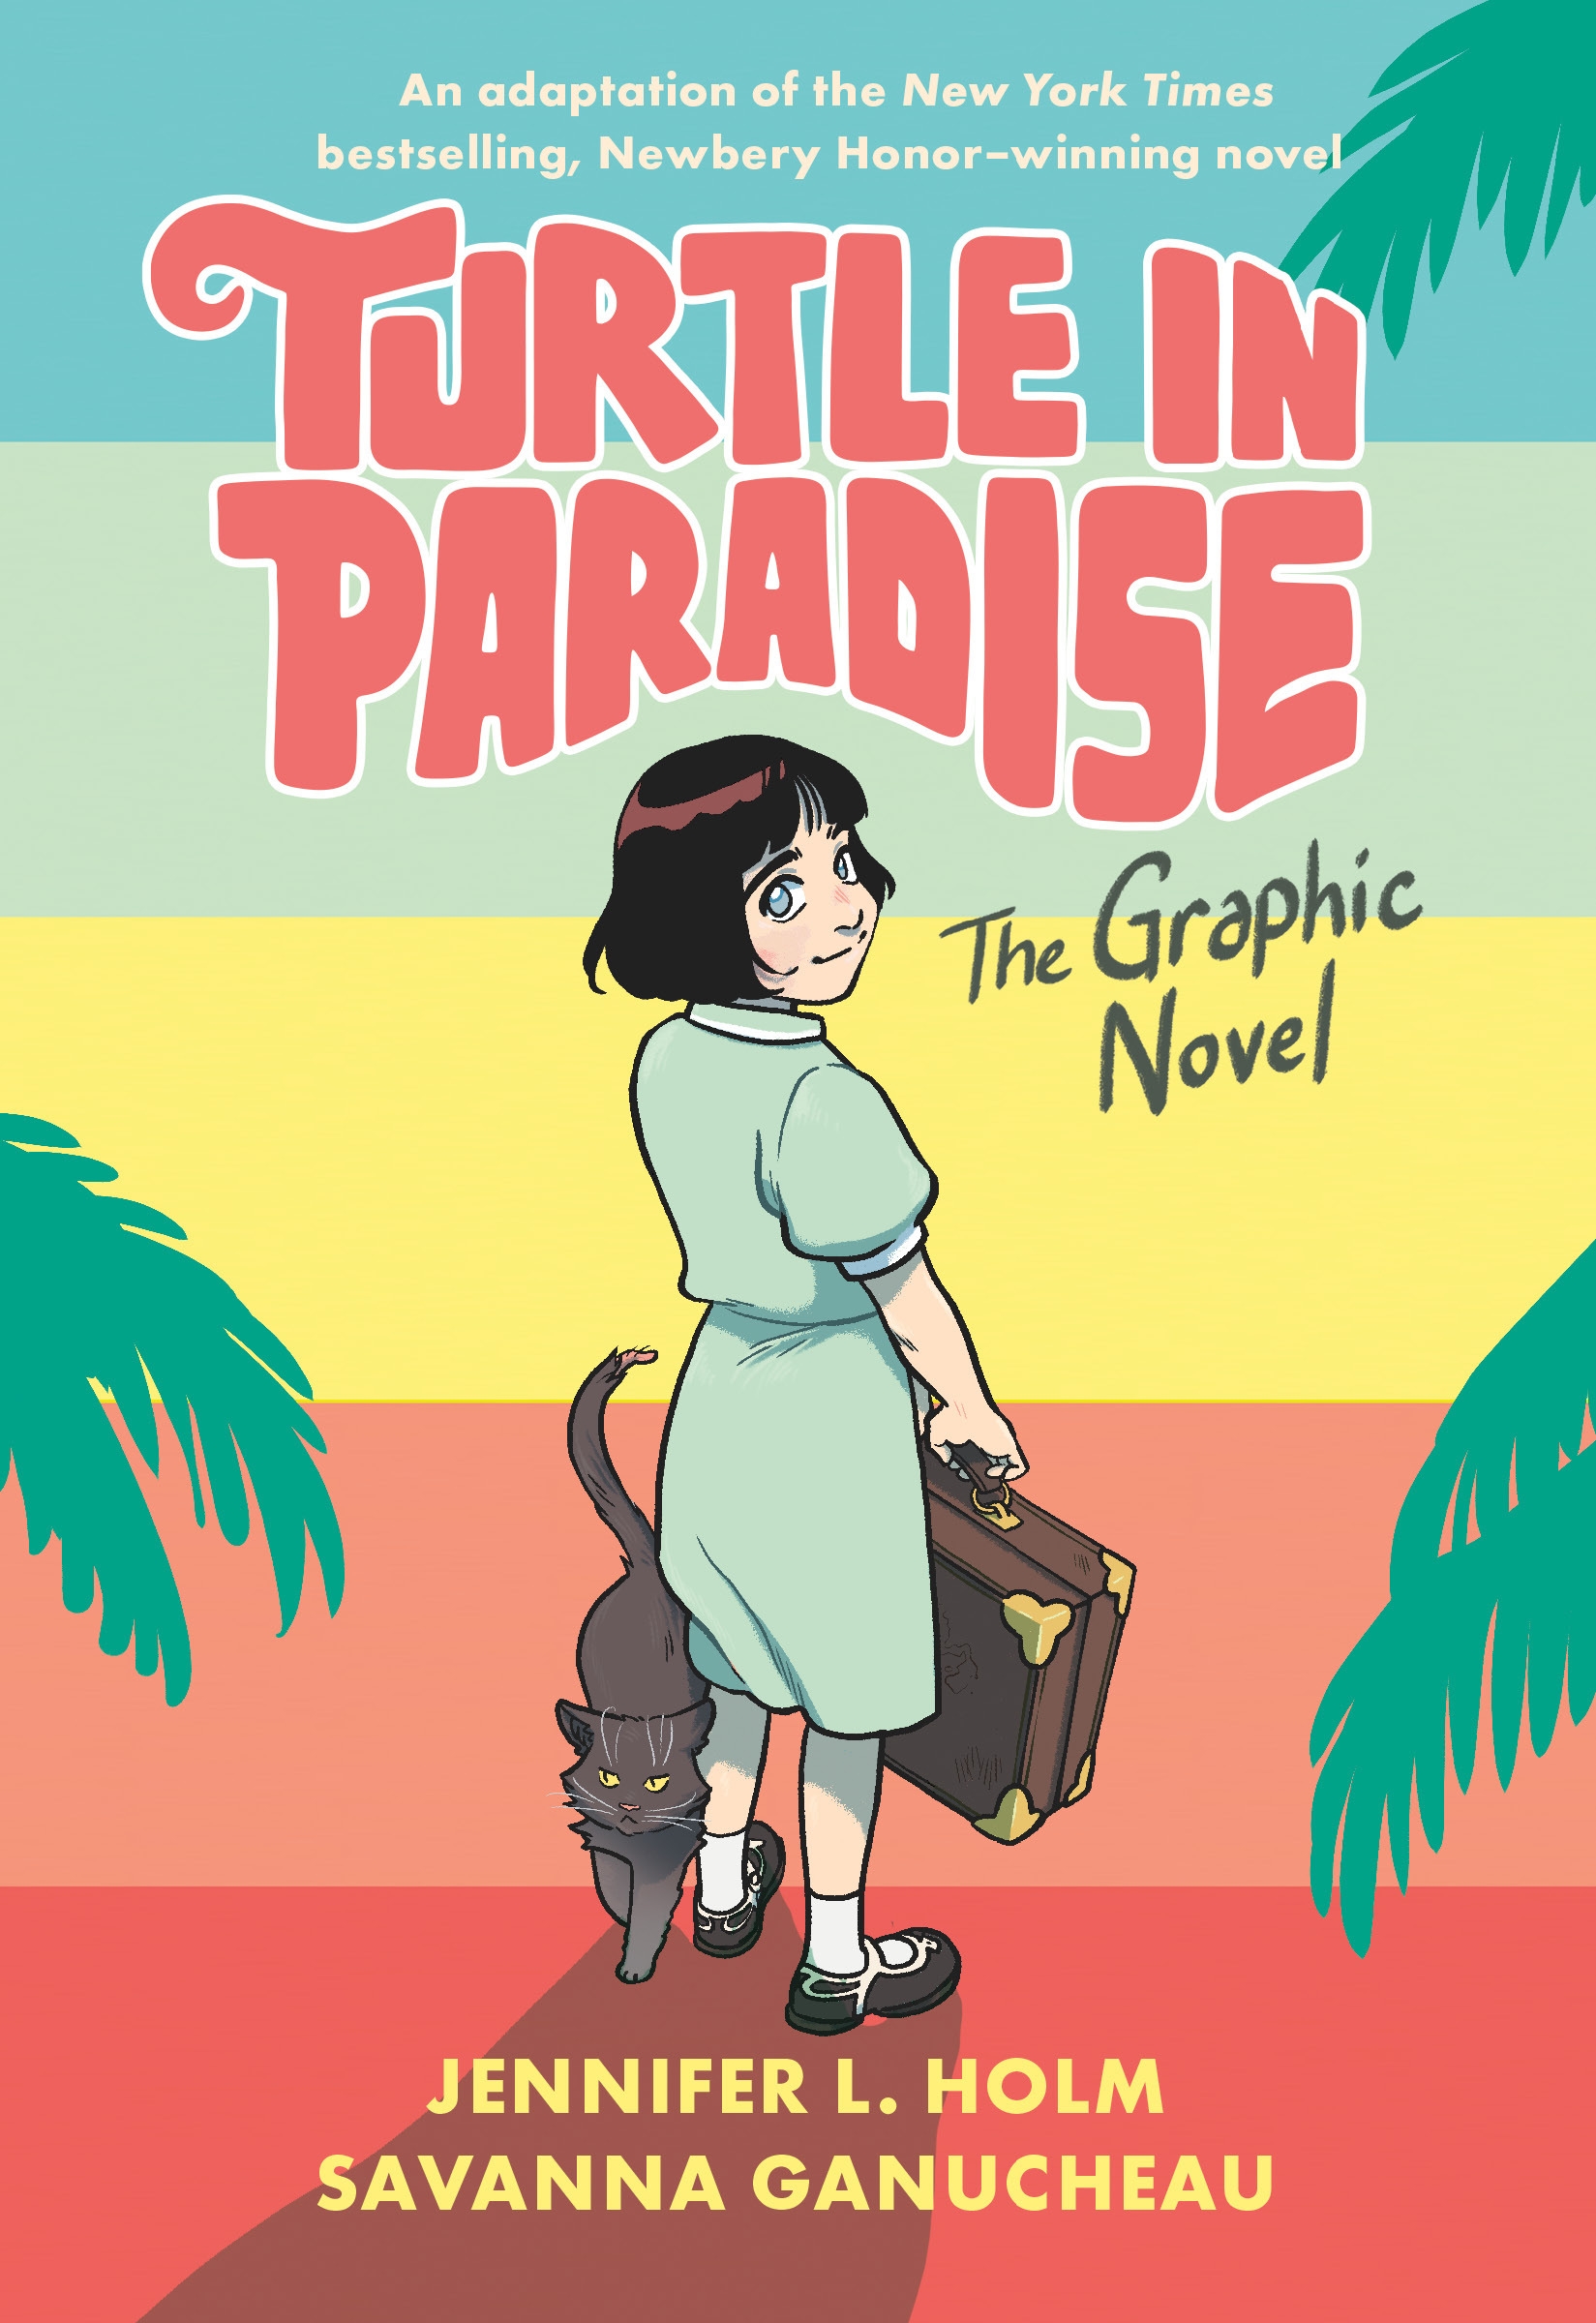 book review of turtle in paradise